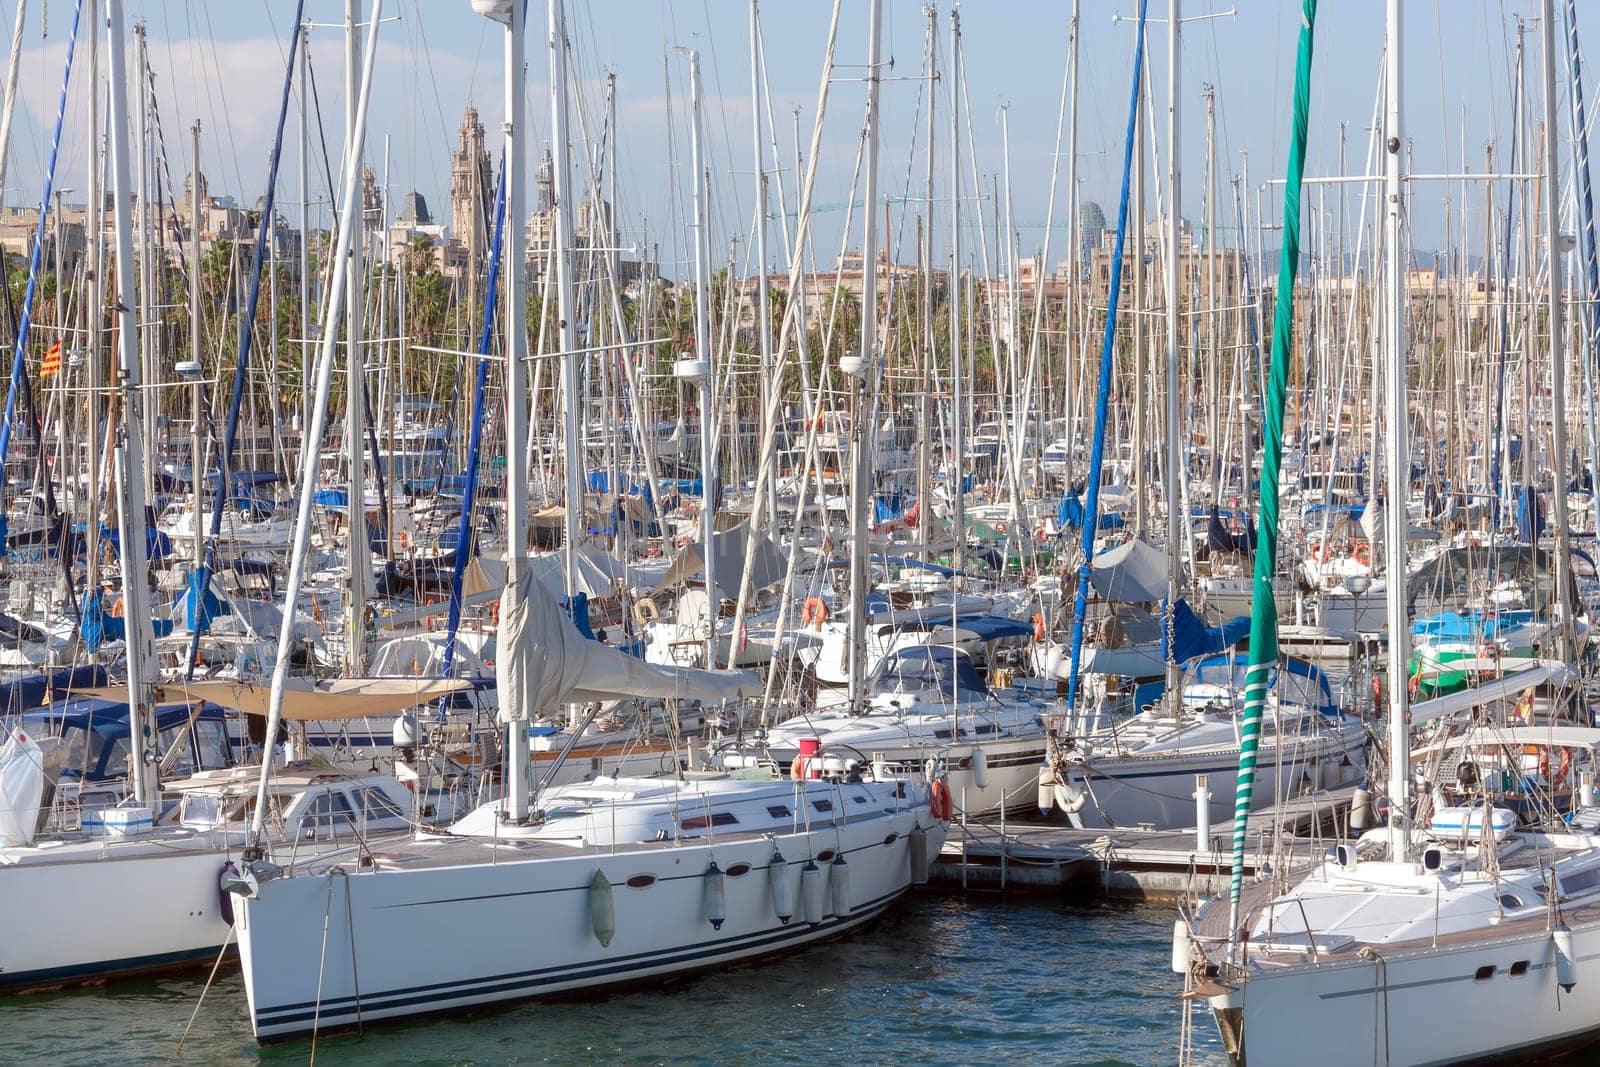 Yachts and boats in the Port of Barcelona